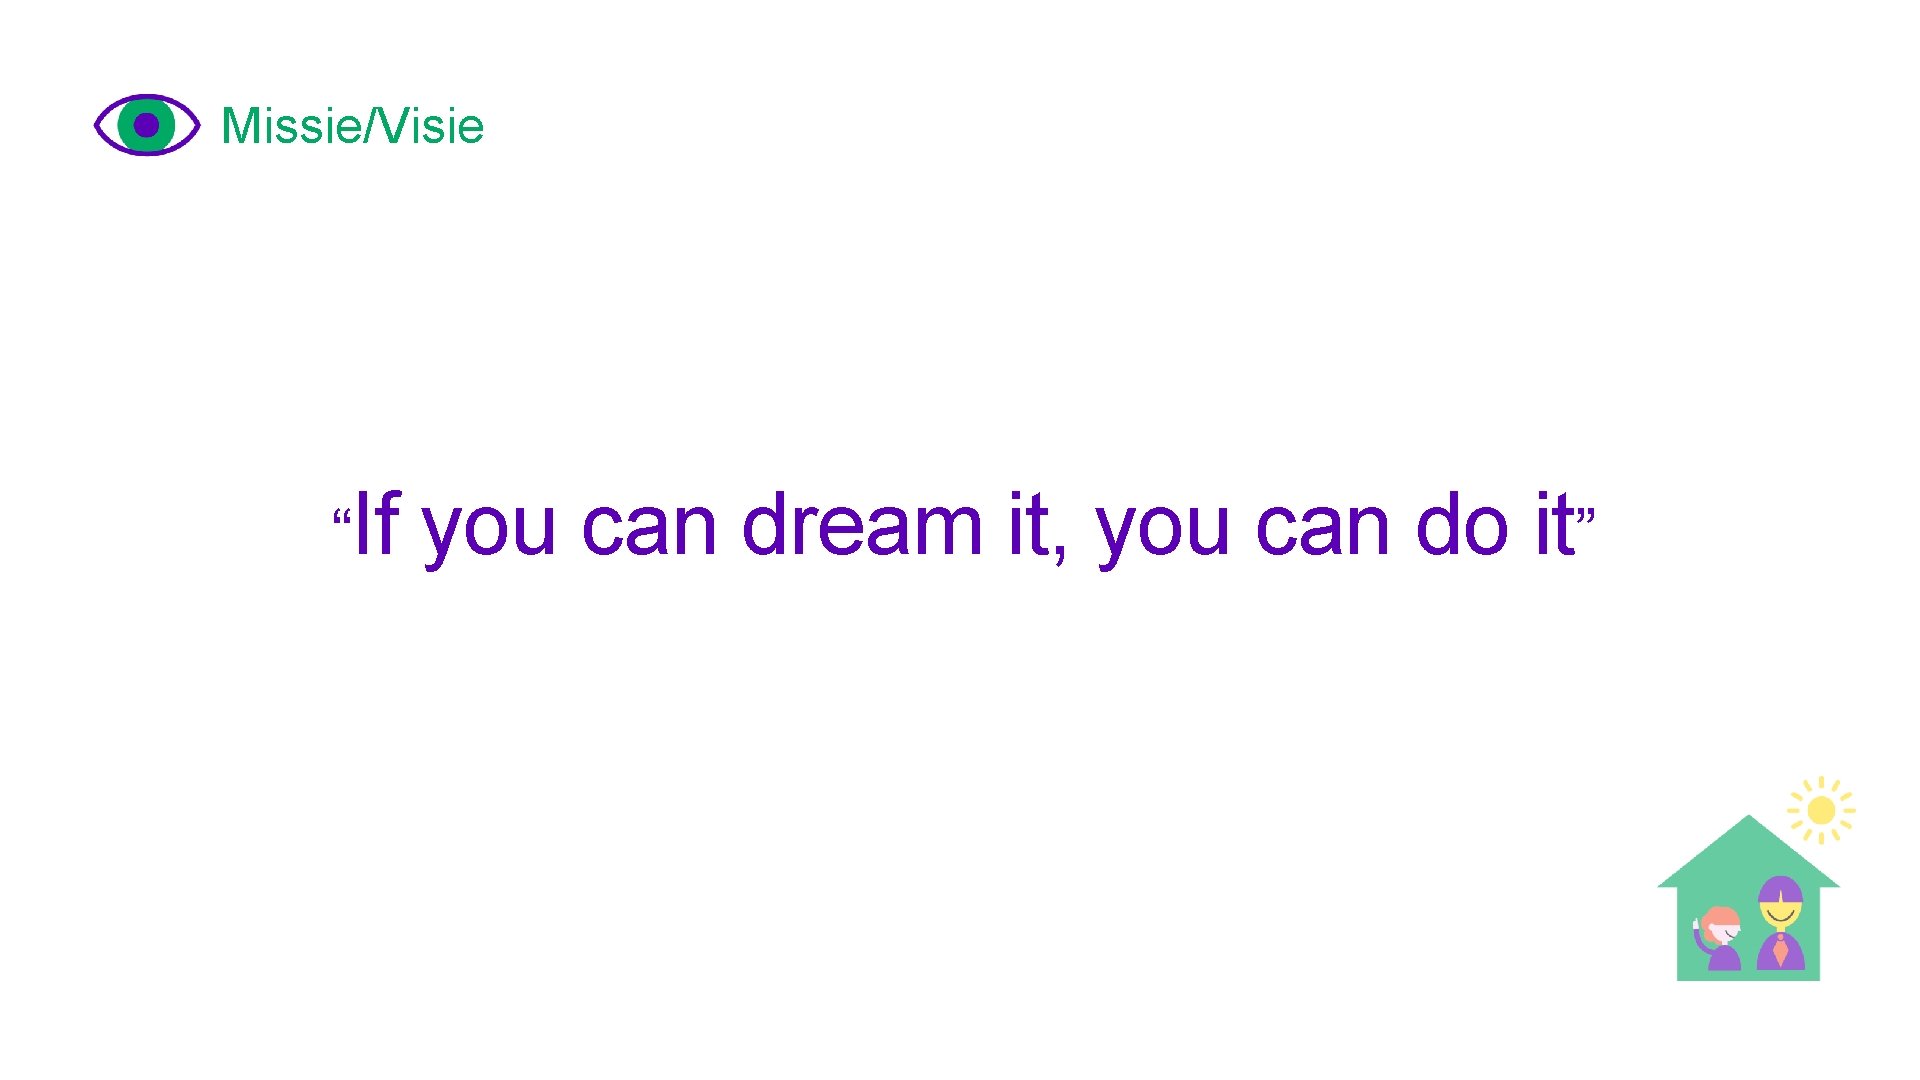 Missie/Visie “If you can dream it, you can do it” 